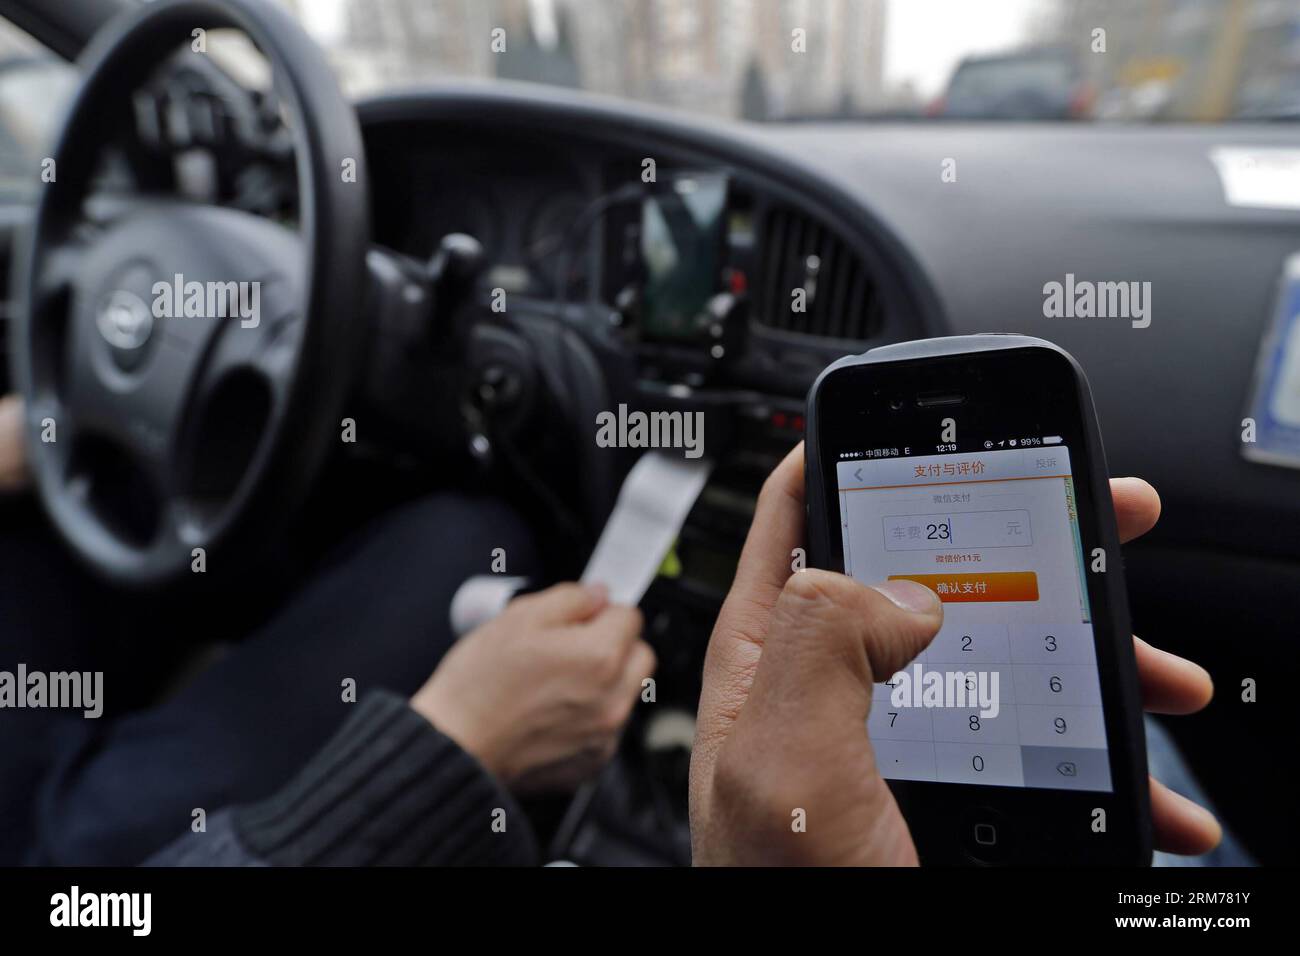 (140218) -- BEIJING, Feb. 18, 2014 (Xinhua) -- A journalist use Didi, a cab-hailing app to pay the bill in Beijing, capital of China, Feb. 18, 2014. Alipay, the country s largest third-party online payment platform and a subsidiary of Alibaba Group, has invested heavily in cab-hailing app KuaiDi on payment subsidies to promote its online payment service. The move came on the heels of a similar subsidy program by cab-hailing app Didi, with investment from Tencent. Didi s incentive, announced early January, encourages passengers to pay taxi fares via Tencent s WeChat, a multi-media app combining Stock Photo